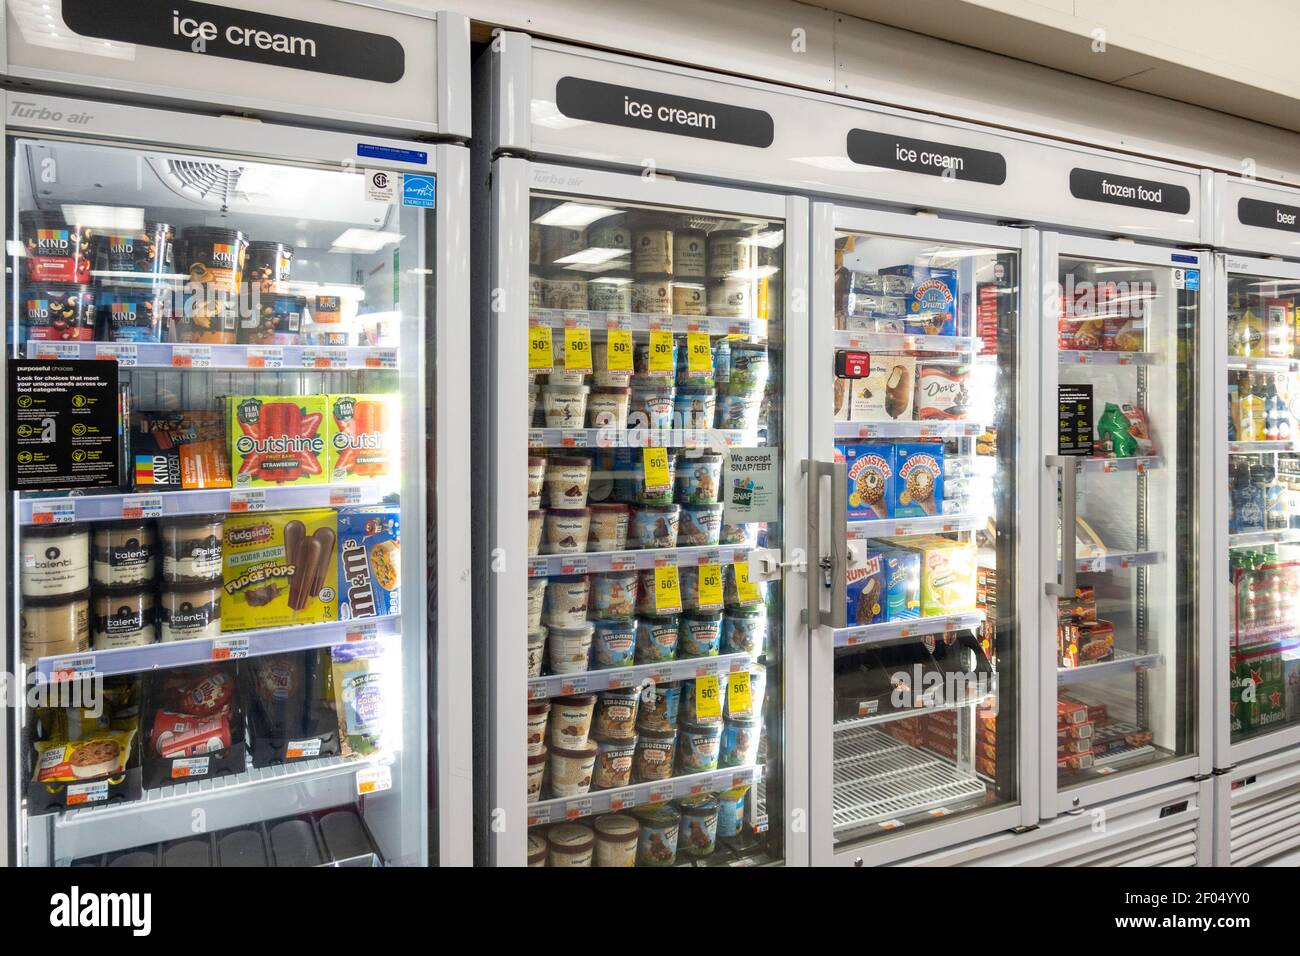 Refrigerated Ice Cream and Frozen Food Section ia a CVS Drugstore, NYC, USA Stock Photo